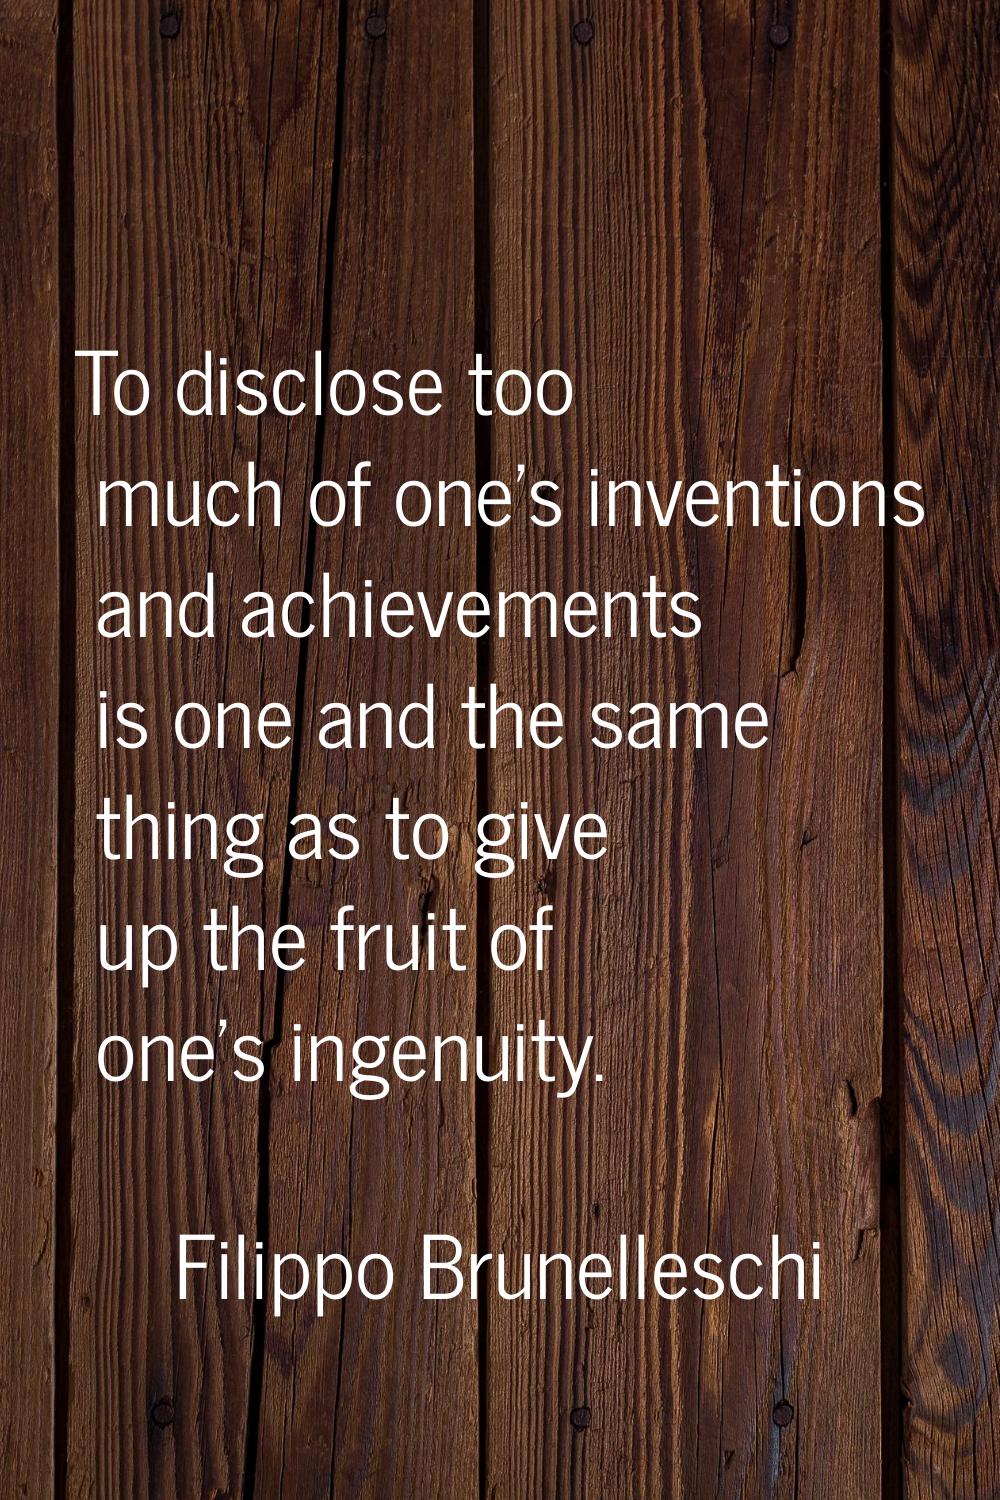 To disclose too much of one's inventions and achievements is one and the same thing as to give up t